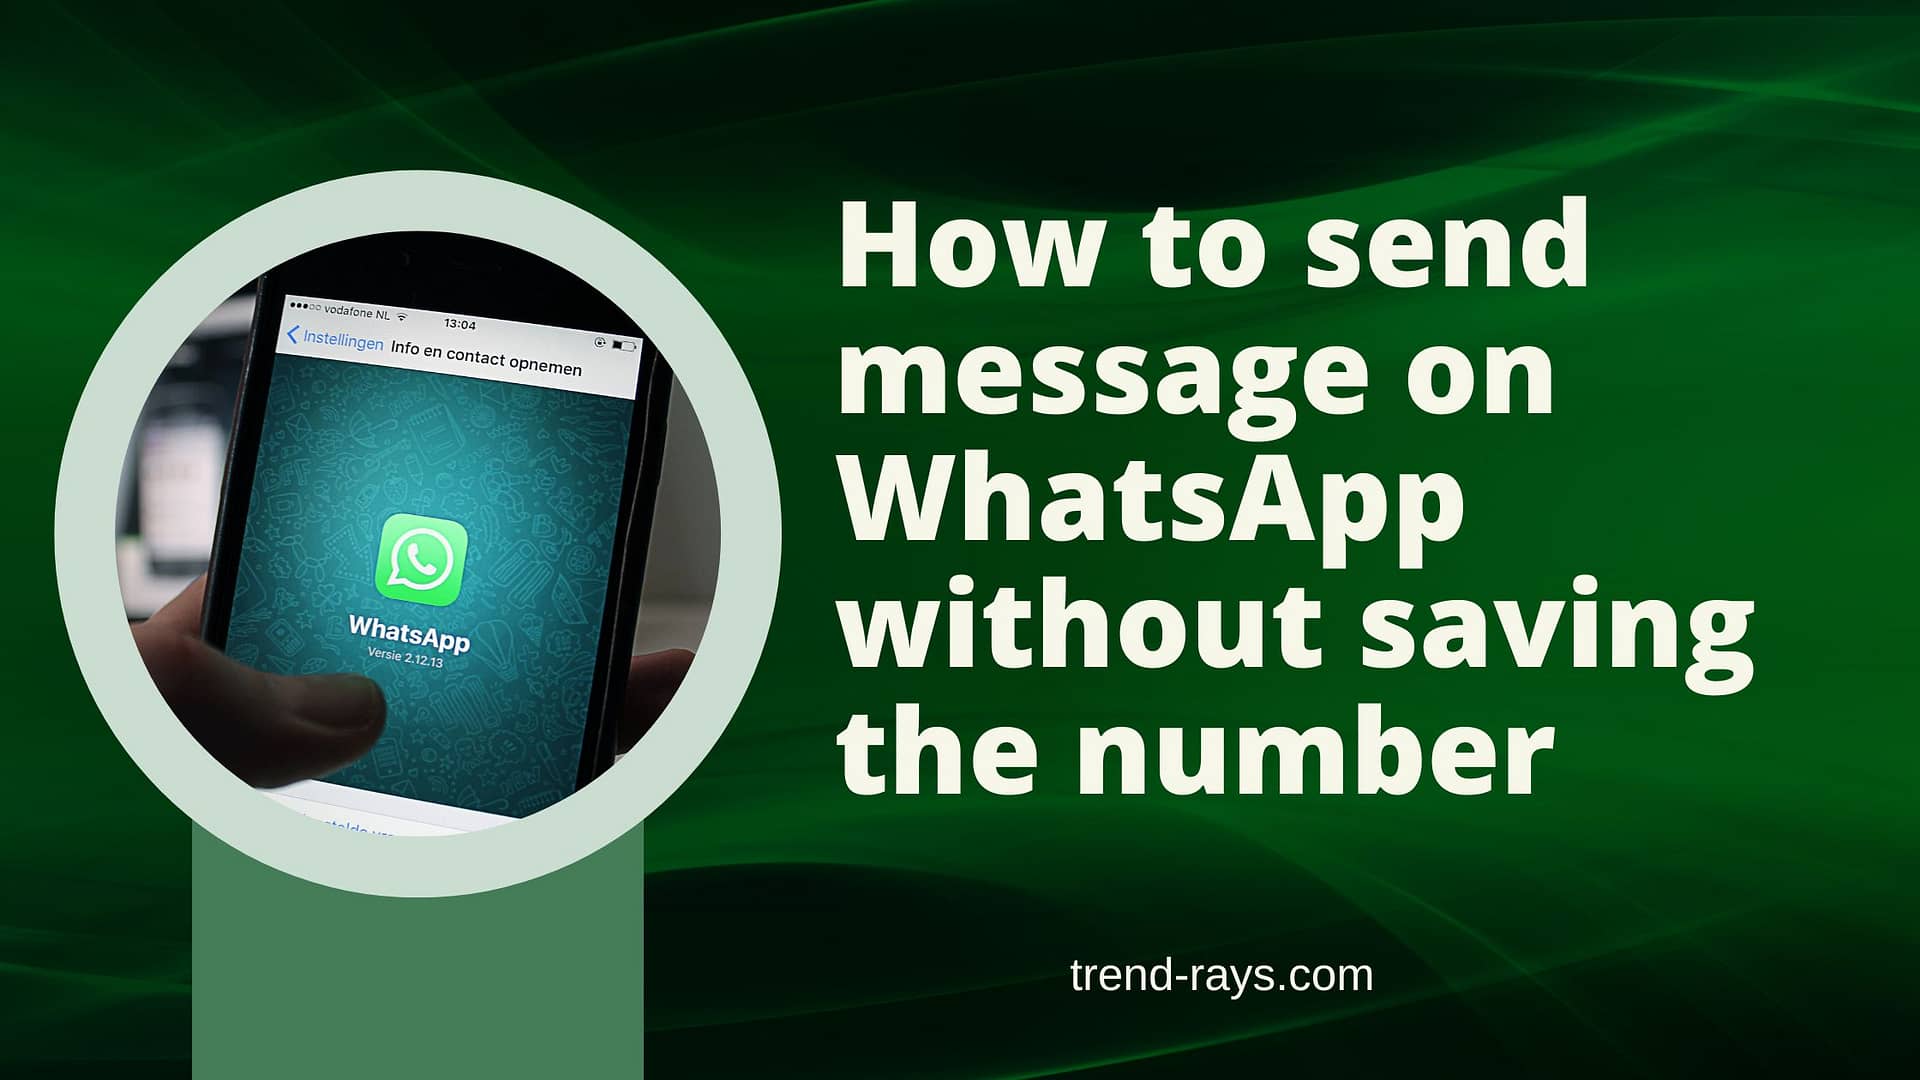 How to send message on WhatsApp without saving the number